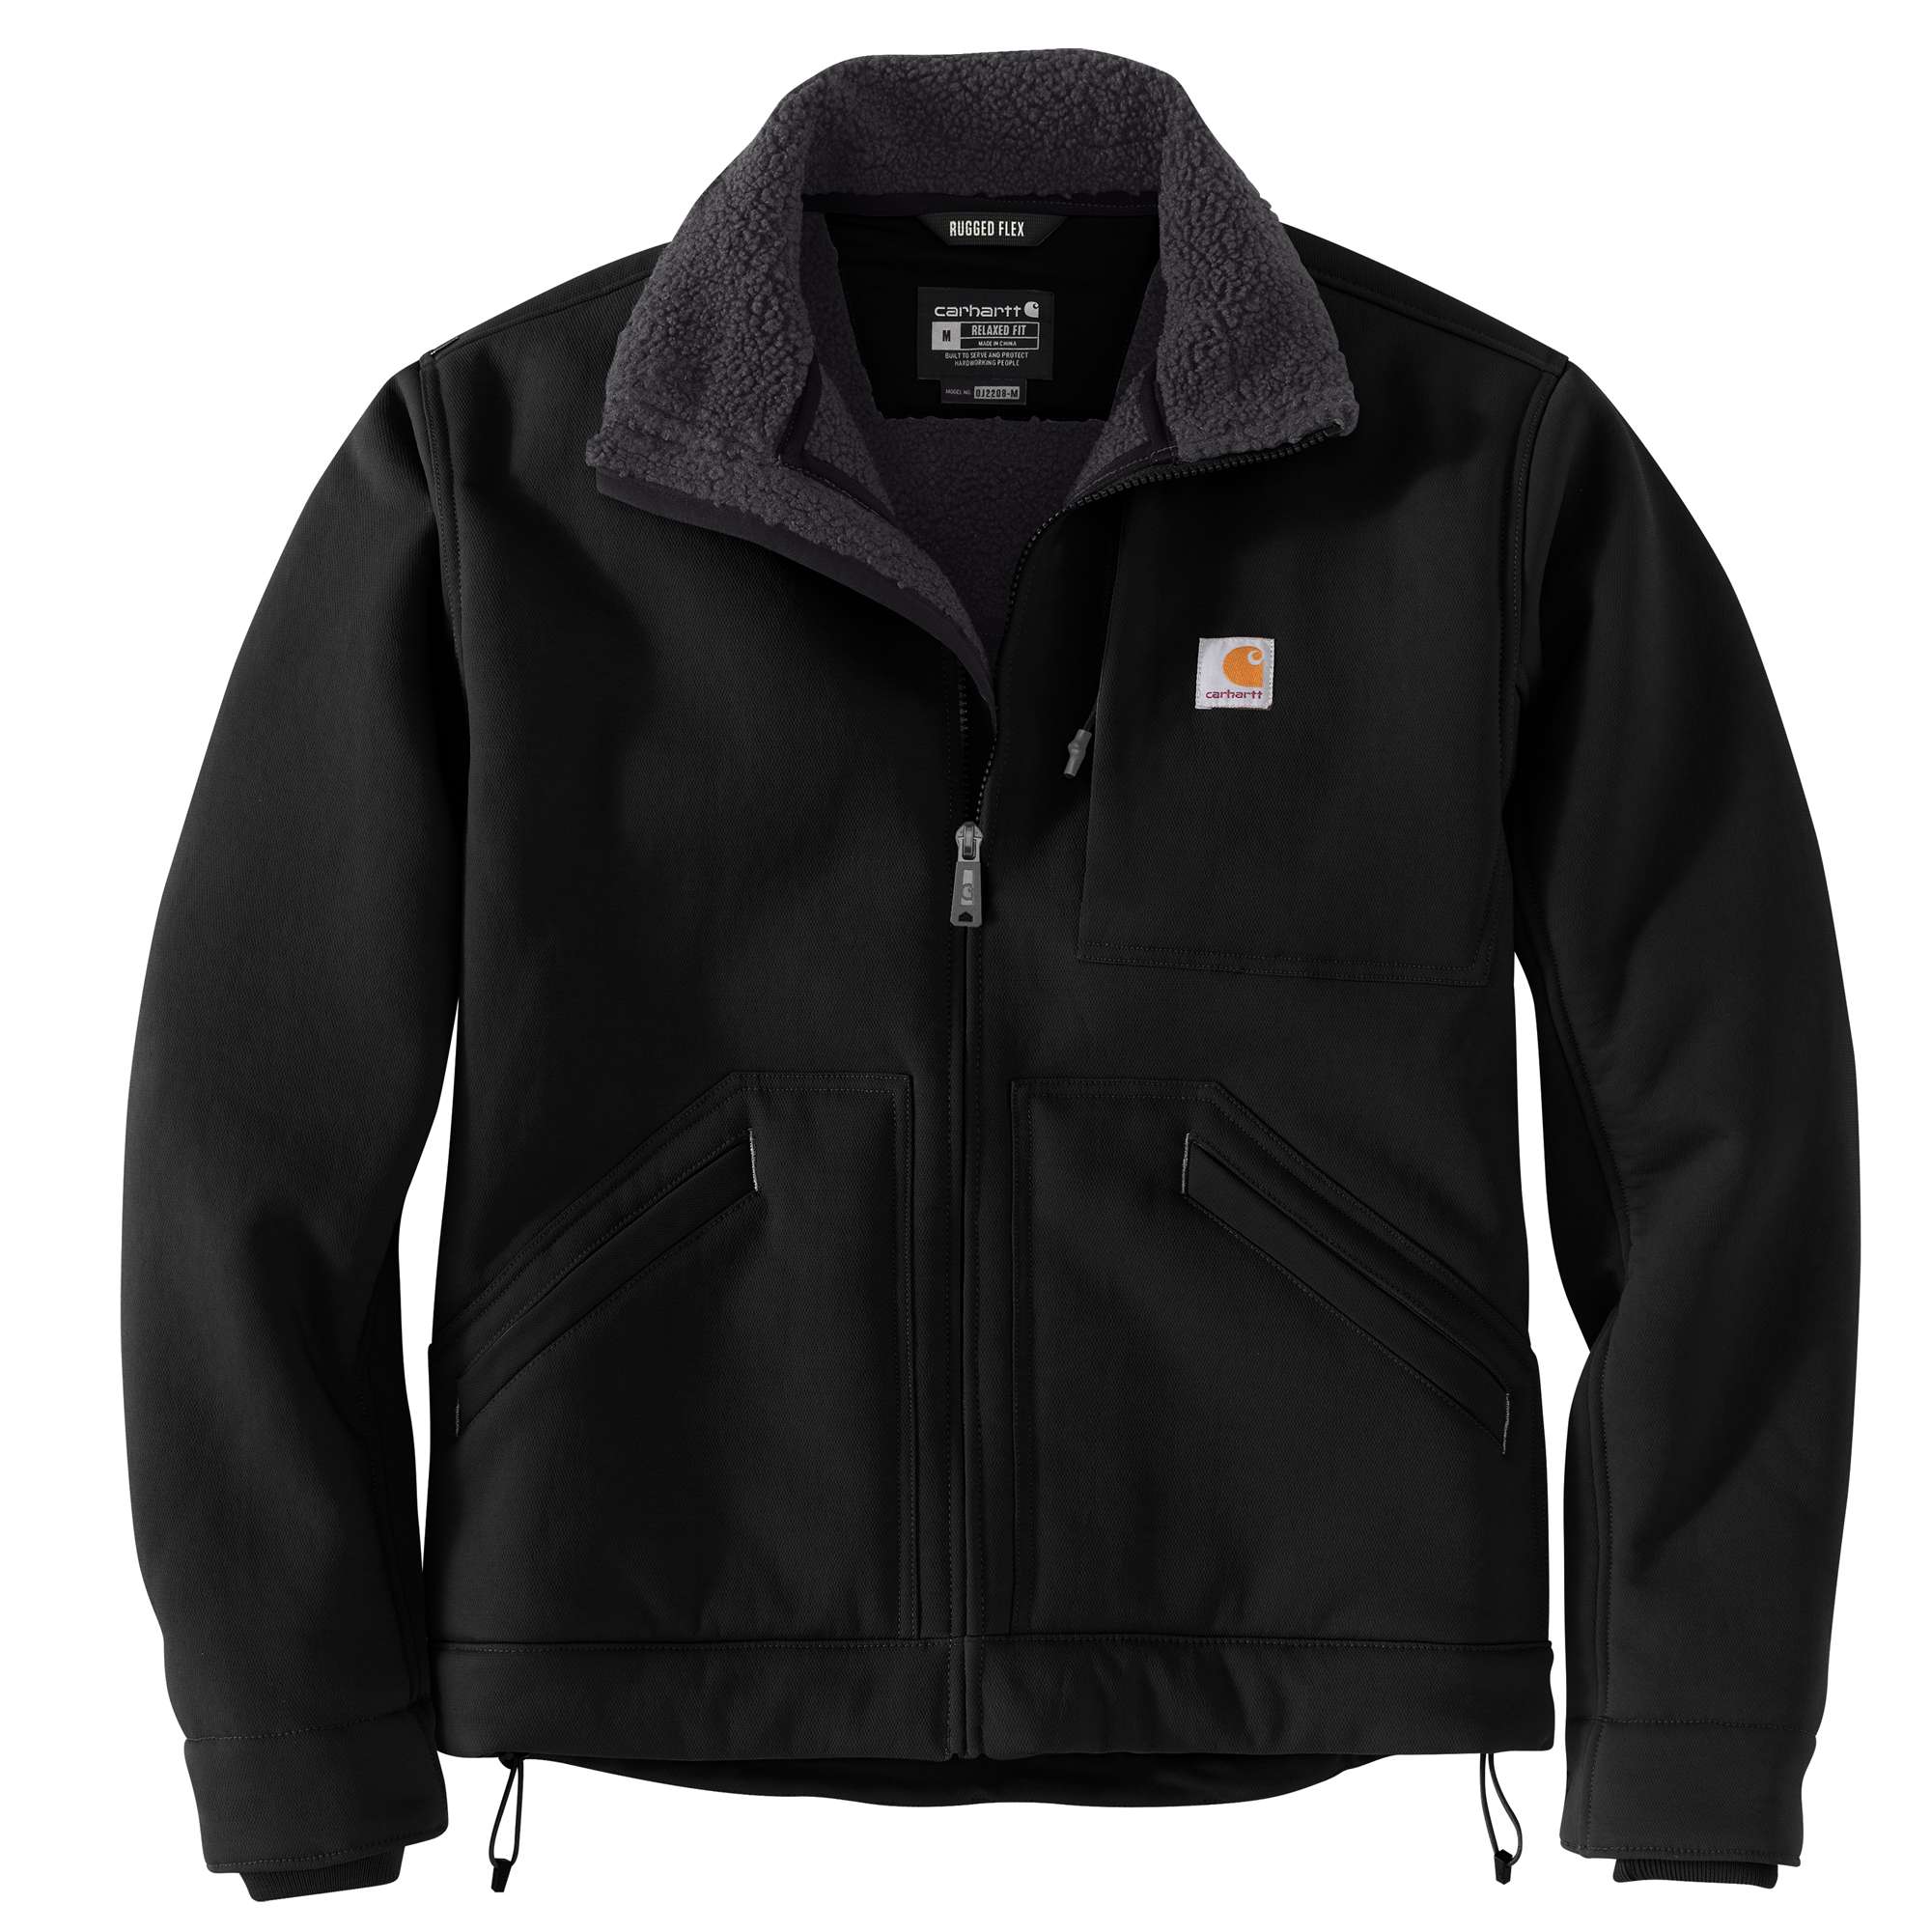 Carhartt - First created back in 1930, Super Dux was